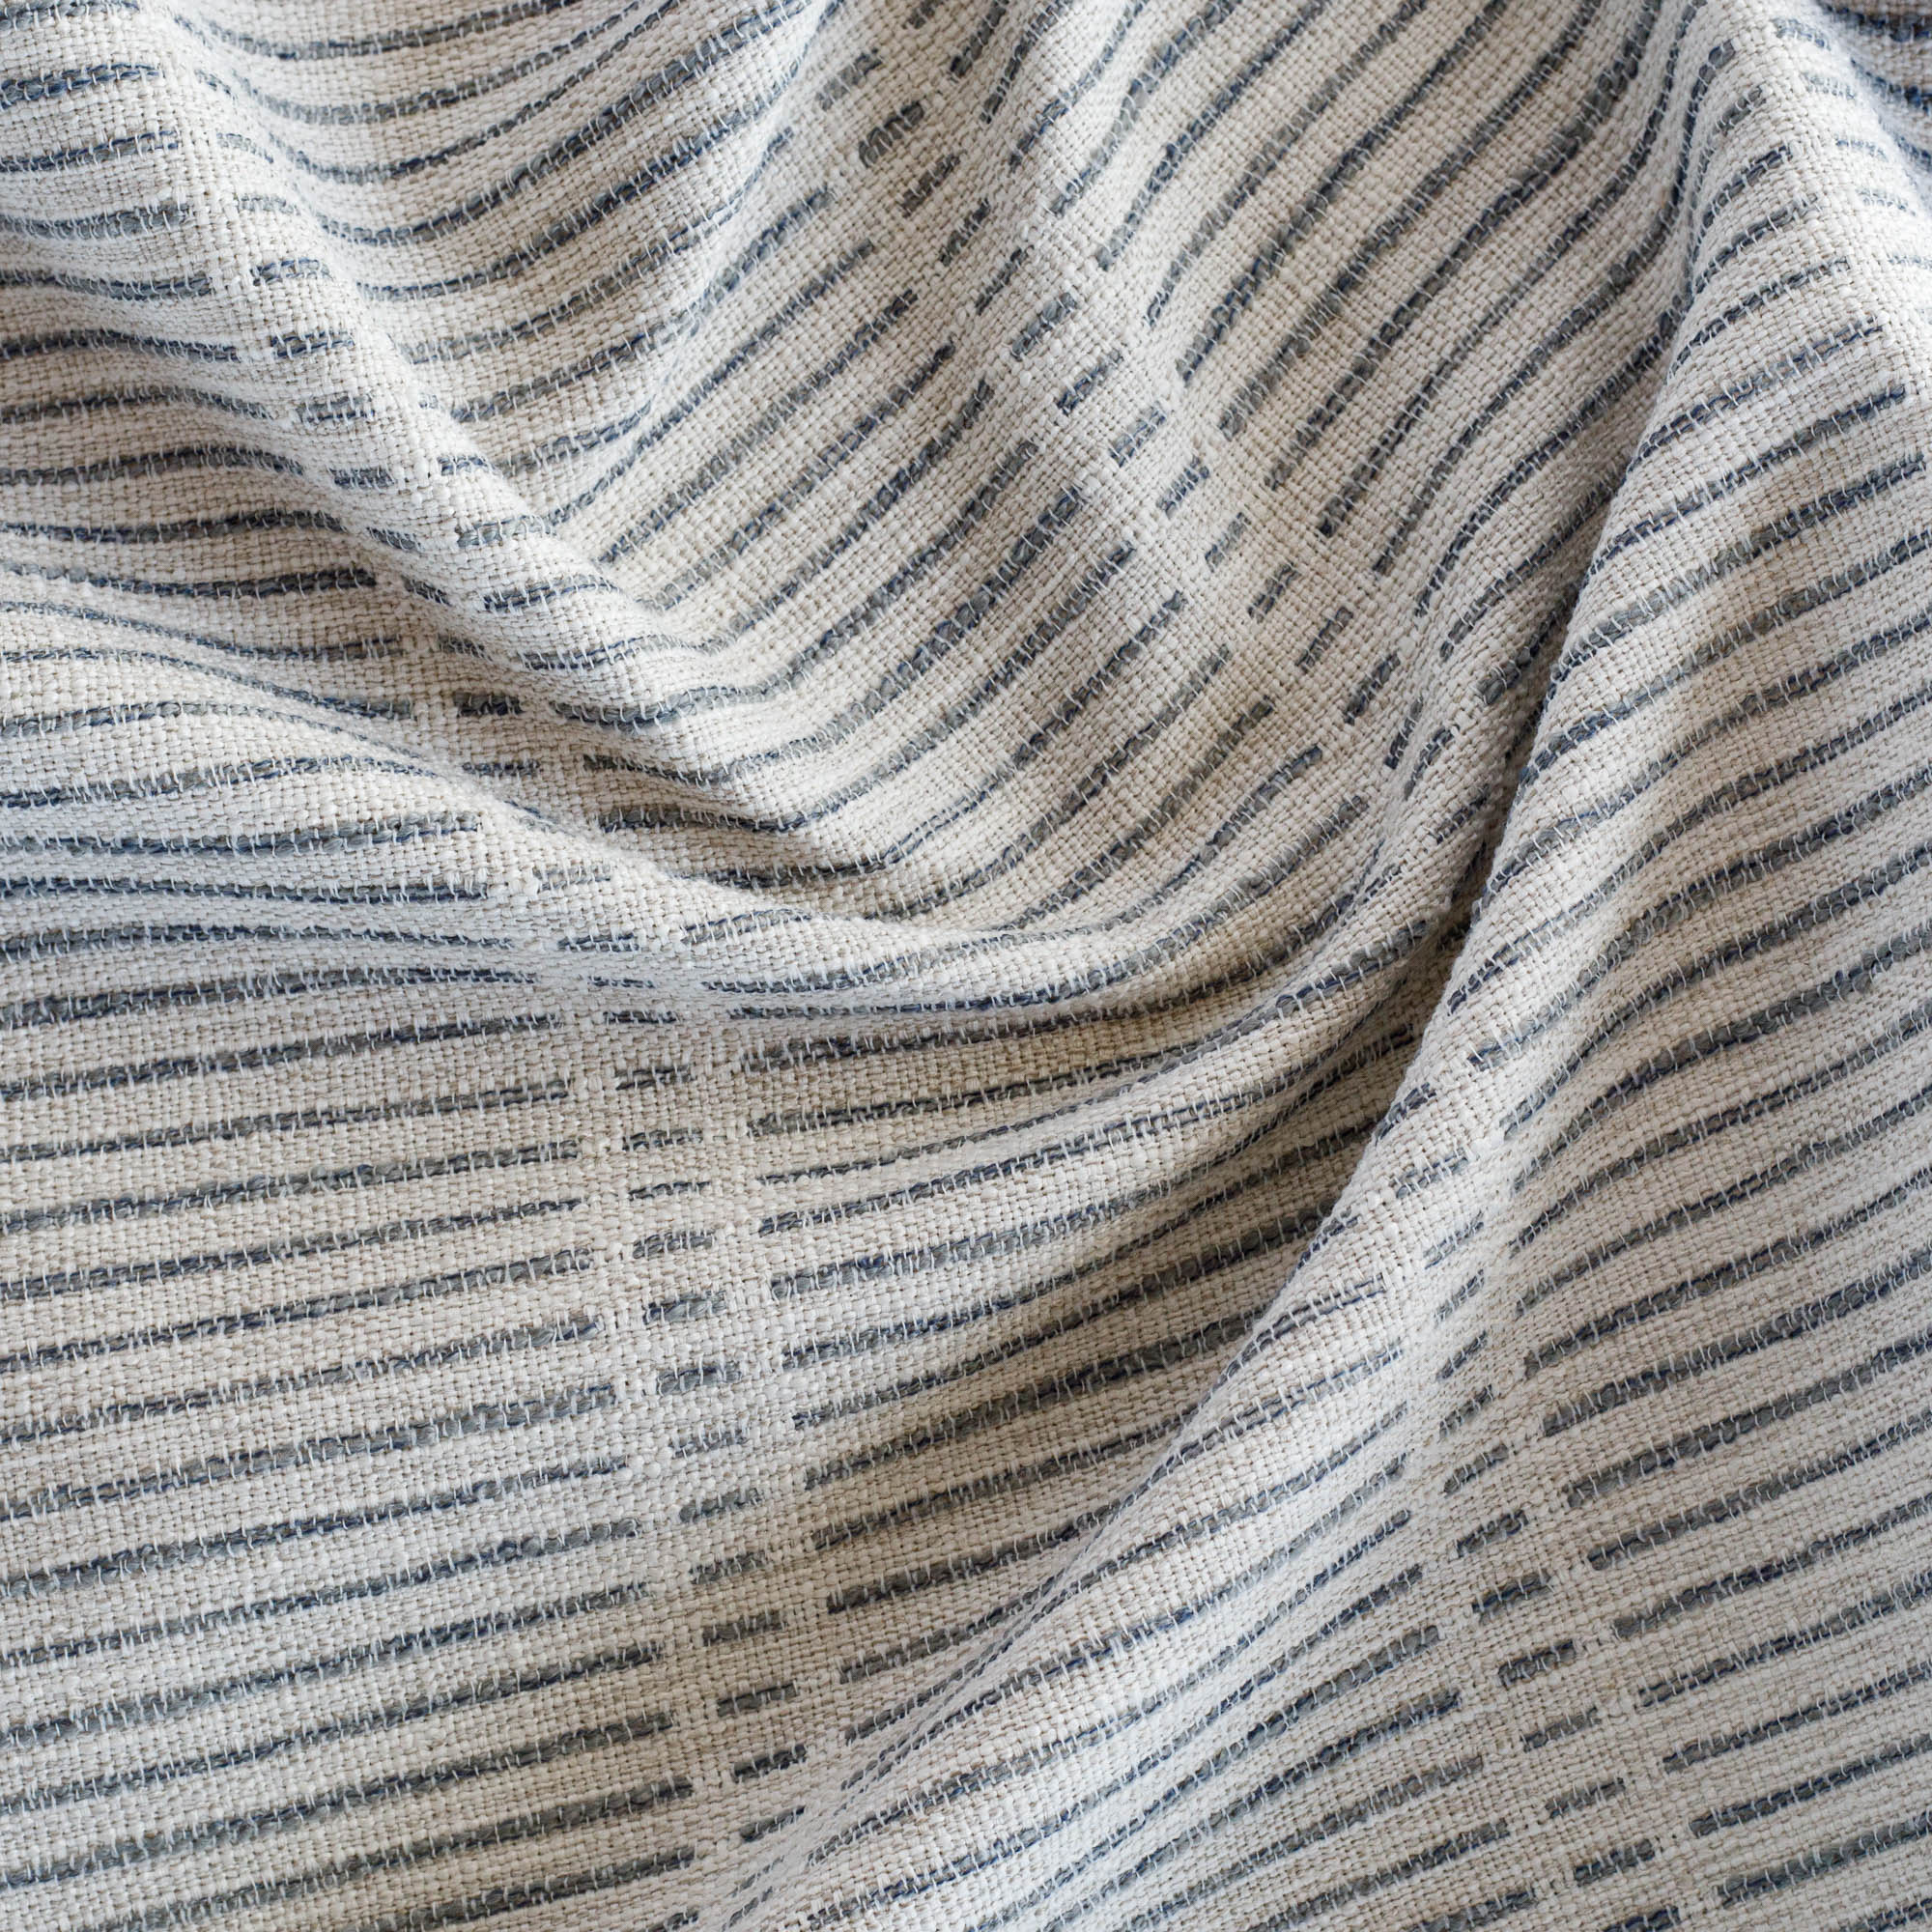 a woven light beige and blue dashed stripe patterned home decor fabric